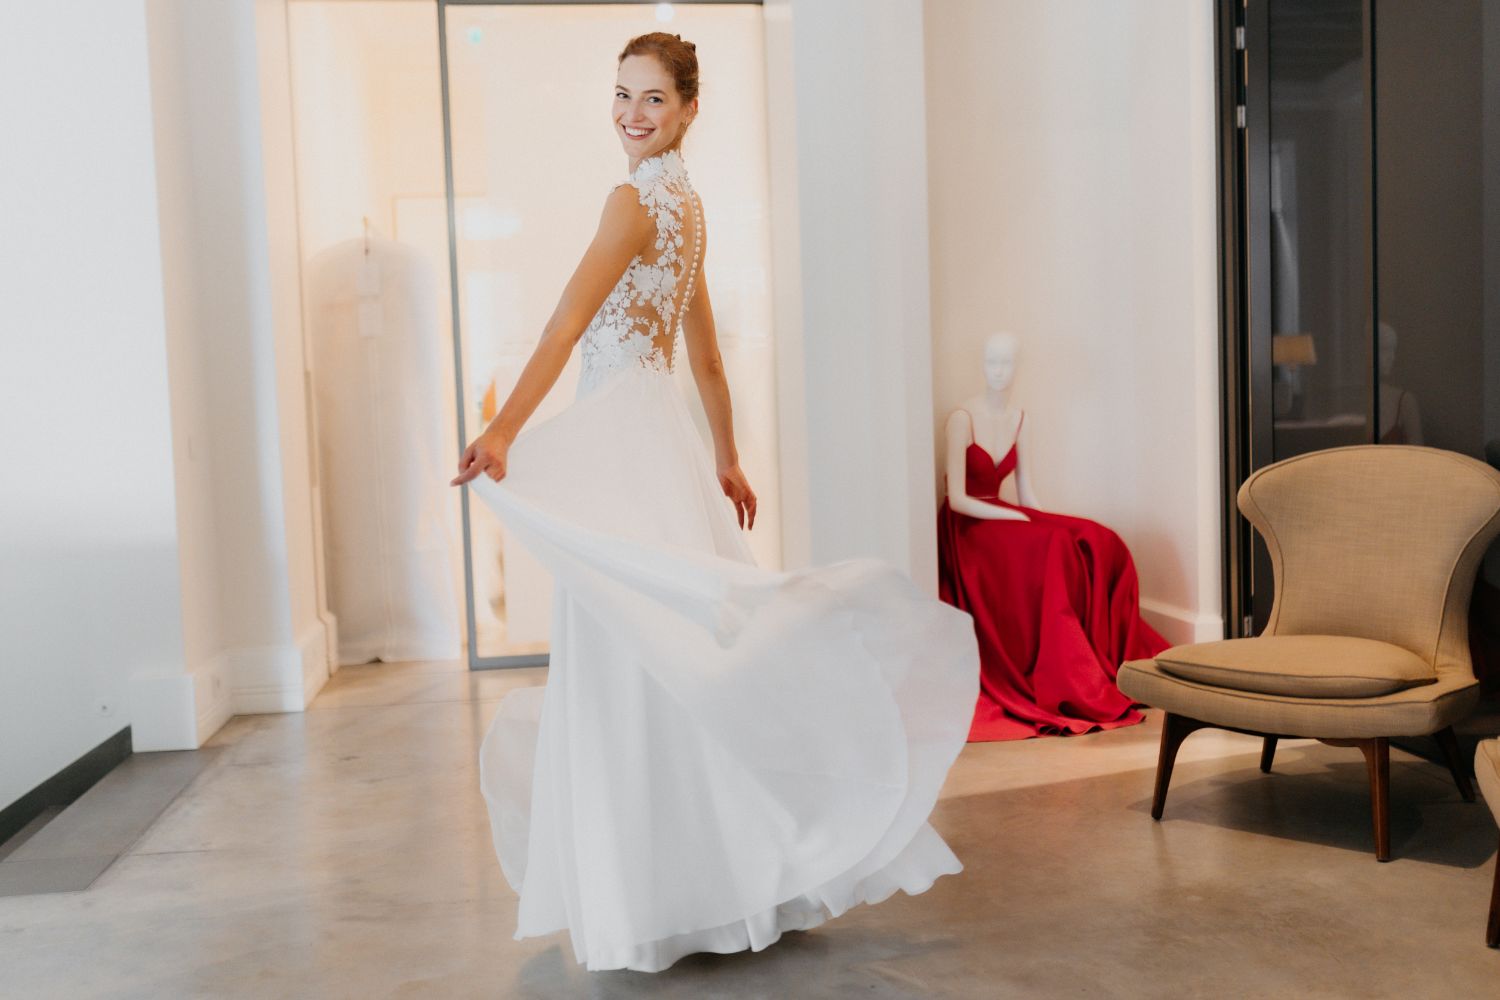 All the details about the Hungarian top model's wedding dress made by Hungarian brand Daalarna